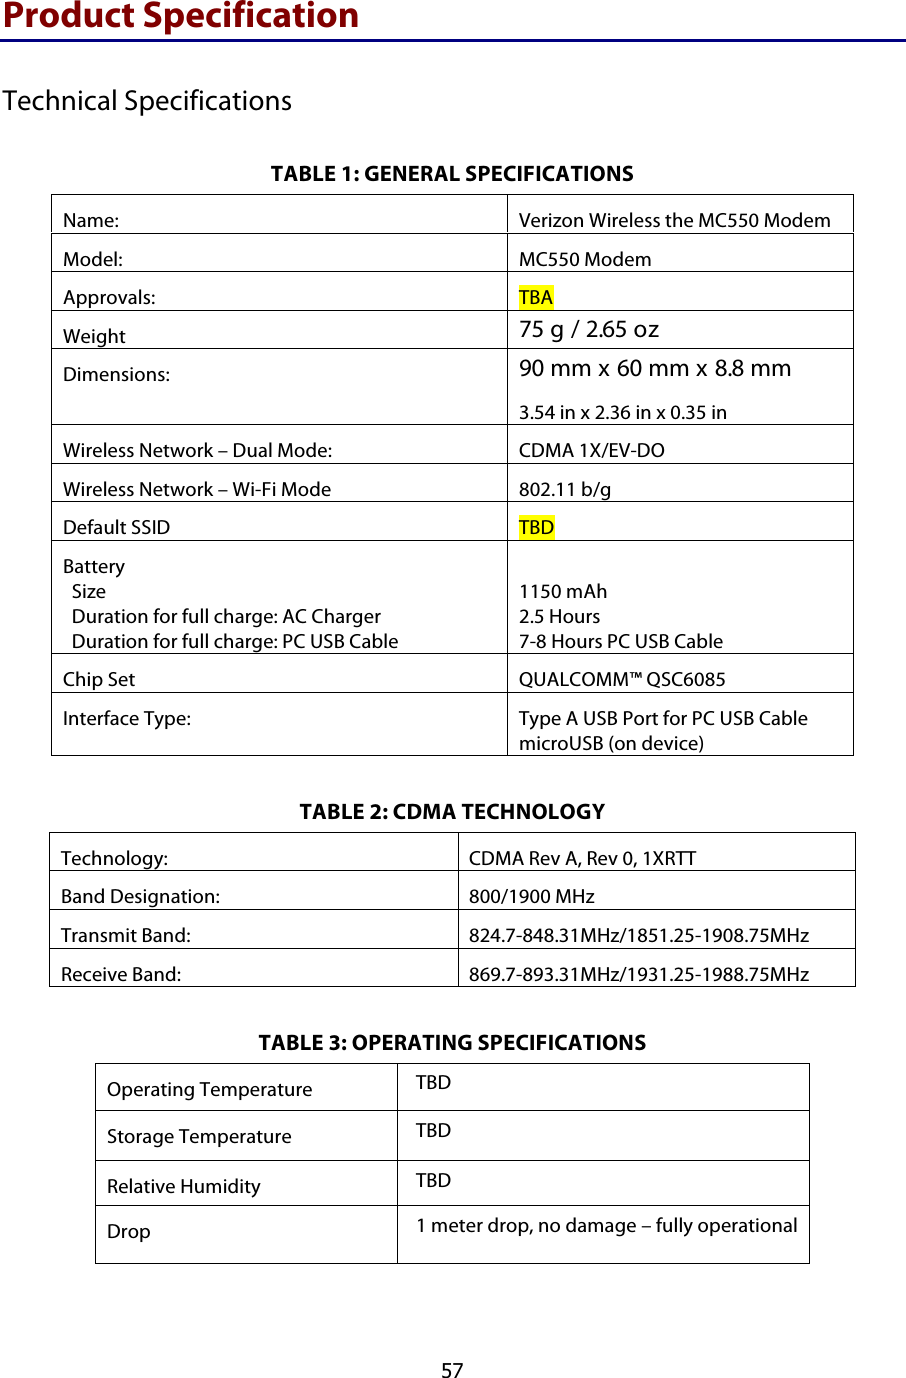  57 Product Specification Technical Specifications TABLE 1: GENERAL SPECIFICATIONS TABLE 2: CDMA TECHNOLOGY Technology: CDMA Rev A, Rev 0, 1XRTT Band Designation: 800/1900 MHz Transmit Band: 824.7-848.31MHz/1851.25-1908.75MHz Receive Band: 869.7-893.31MHz/1931.25-1988.75MHz TABLE 3: OPERATING SPECIFICATIONS Operating Temperature TBD  Storage Temperature TBD  Relative Humidity TBD  Drop 1 meter drop, no damage – fully operational  Name: Verizon Wireless the MC550 Modem Model: MC550 Modem Approvals: TBA  Weight 75 g / 2.65 oz Dimensions: 90 mm x 60 mm x 8.8 mm 3.54 in x 2.36 in x 0.35 in Wireless Network – Dual Mode: CDMA 1X/EV-DO Wireless Network – Wi-Fi Mode 802.11 b/g Default SSID TBD Battery   Size   Duration for full charge: AC Charger   Duration for full charge: PC USB Cable  1150 mAh 2.5 Hours  7-8 Hours PC USB Cable Chip Set QUALCOMM™ QSC6085 Interface Type: Type A USB Port for PC USB Cable microUSB (on device) 